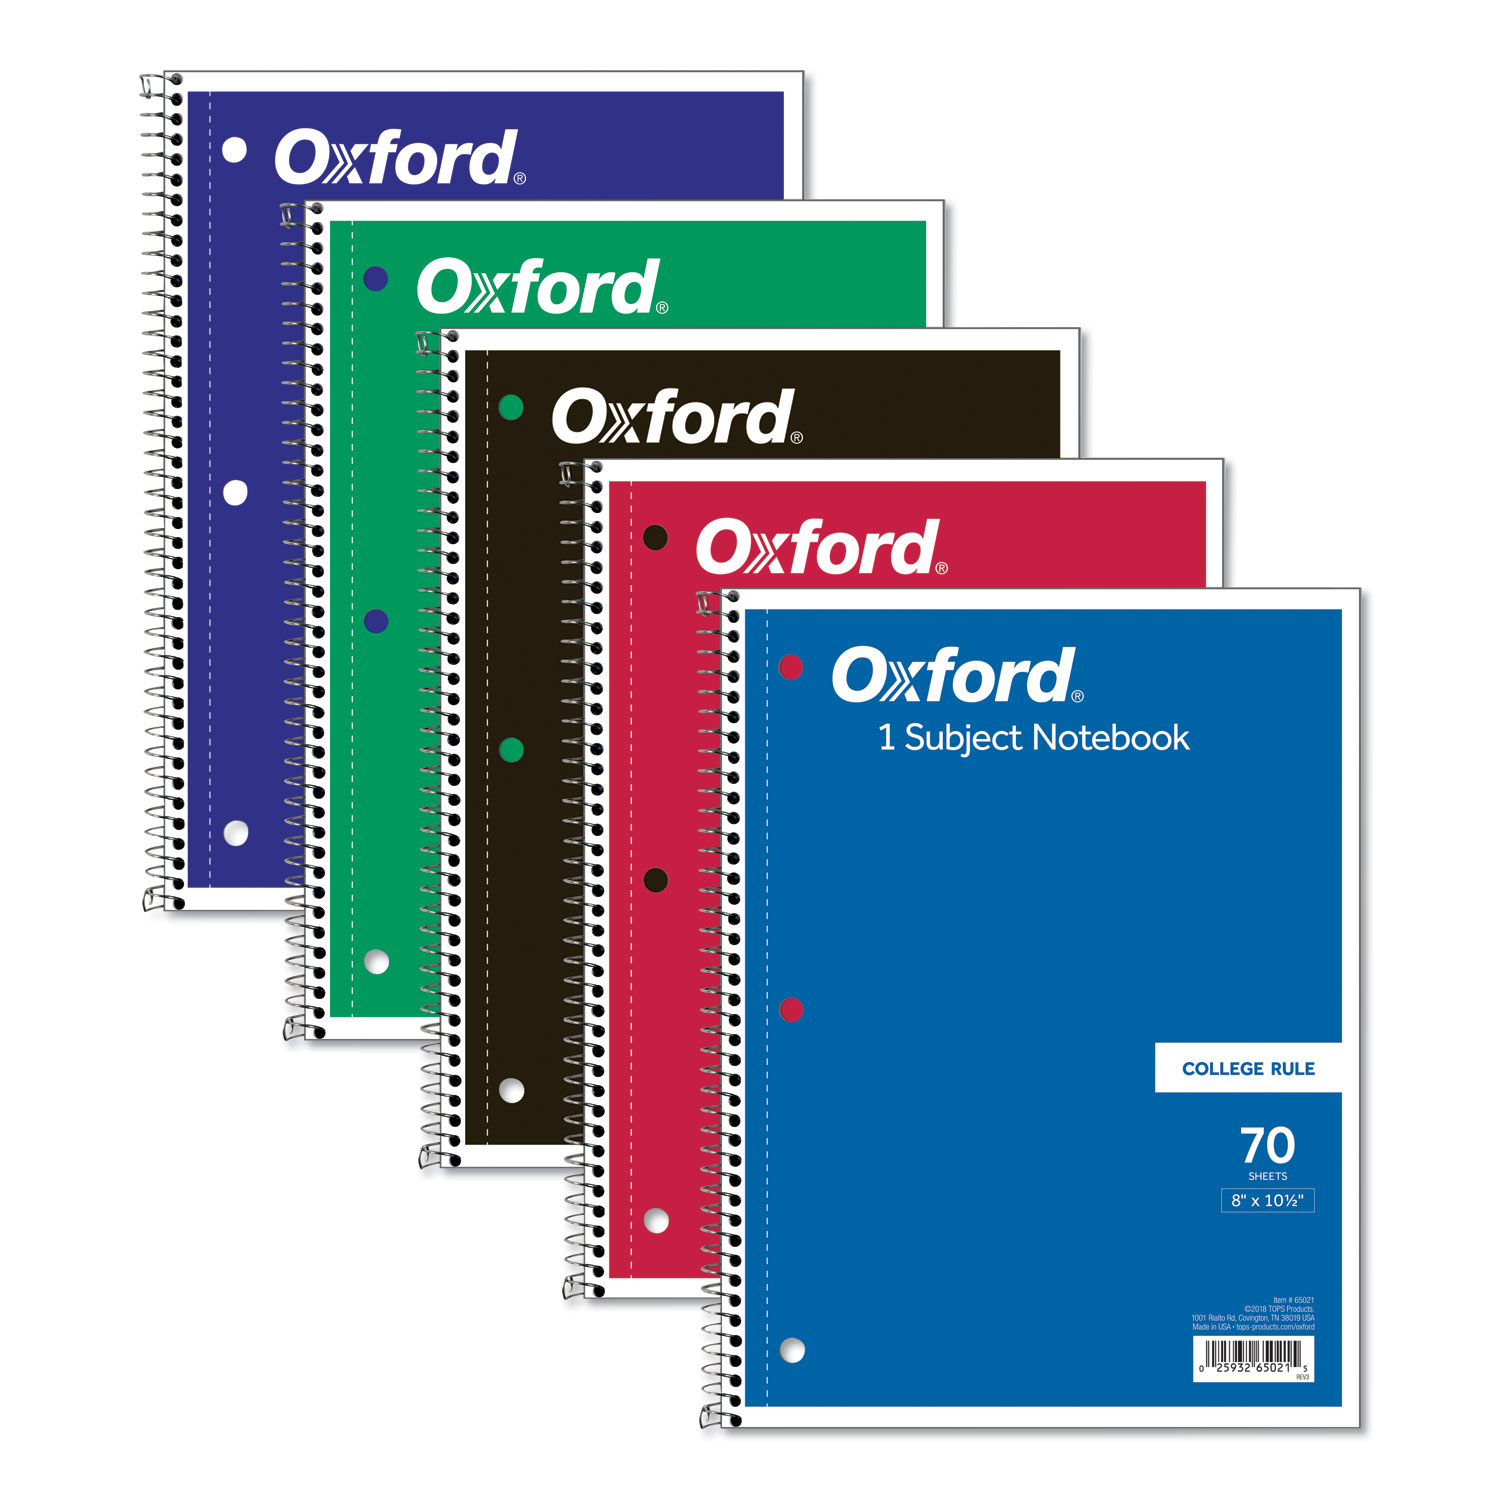  Oxford 65021 Coil-Lock Wirebound Notebooks, 1 Subject, Medium/College Rule, Assorted Color Covers, 10.5 x 8, 70 Sheets (TOP65021) 